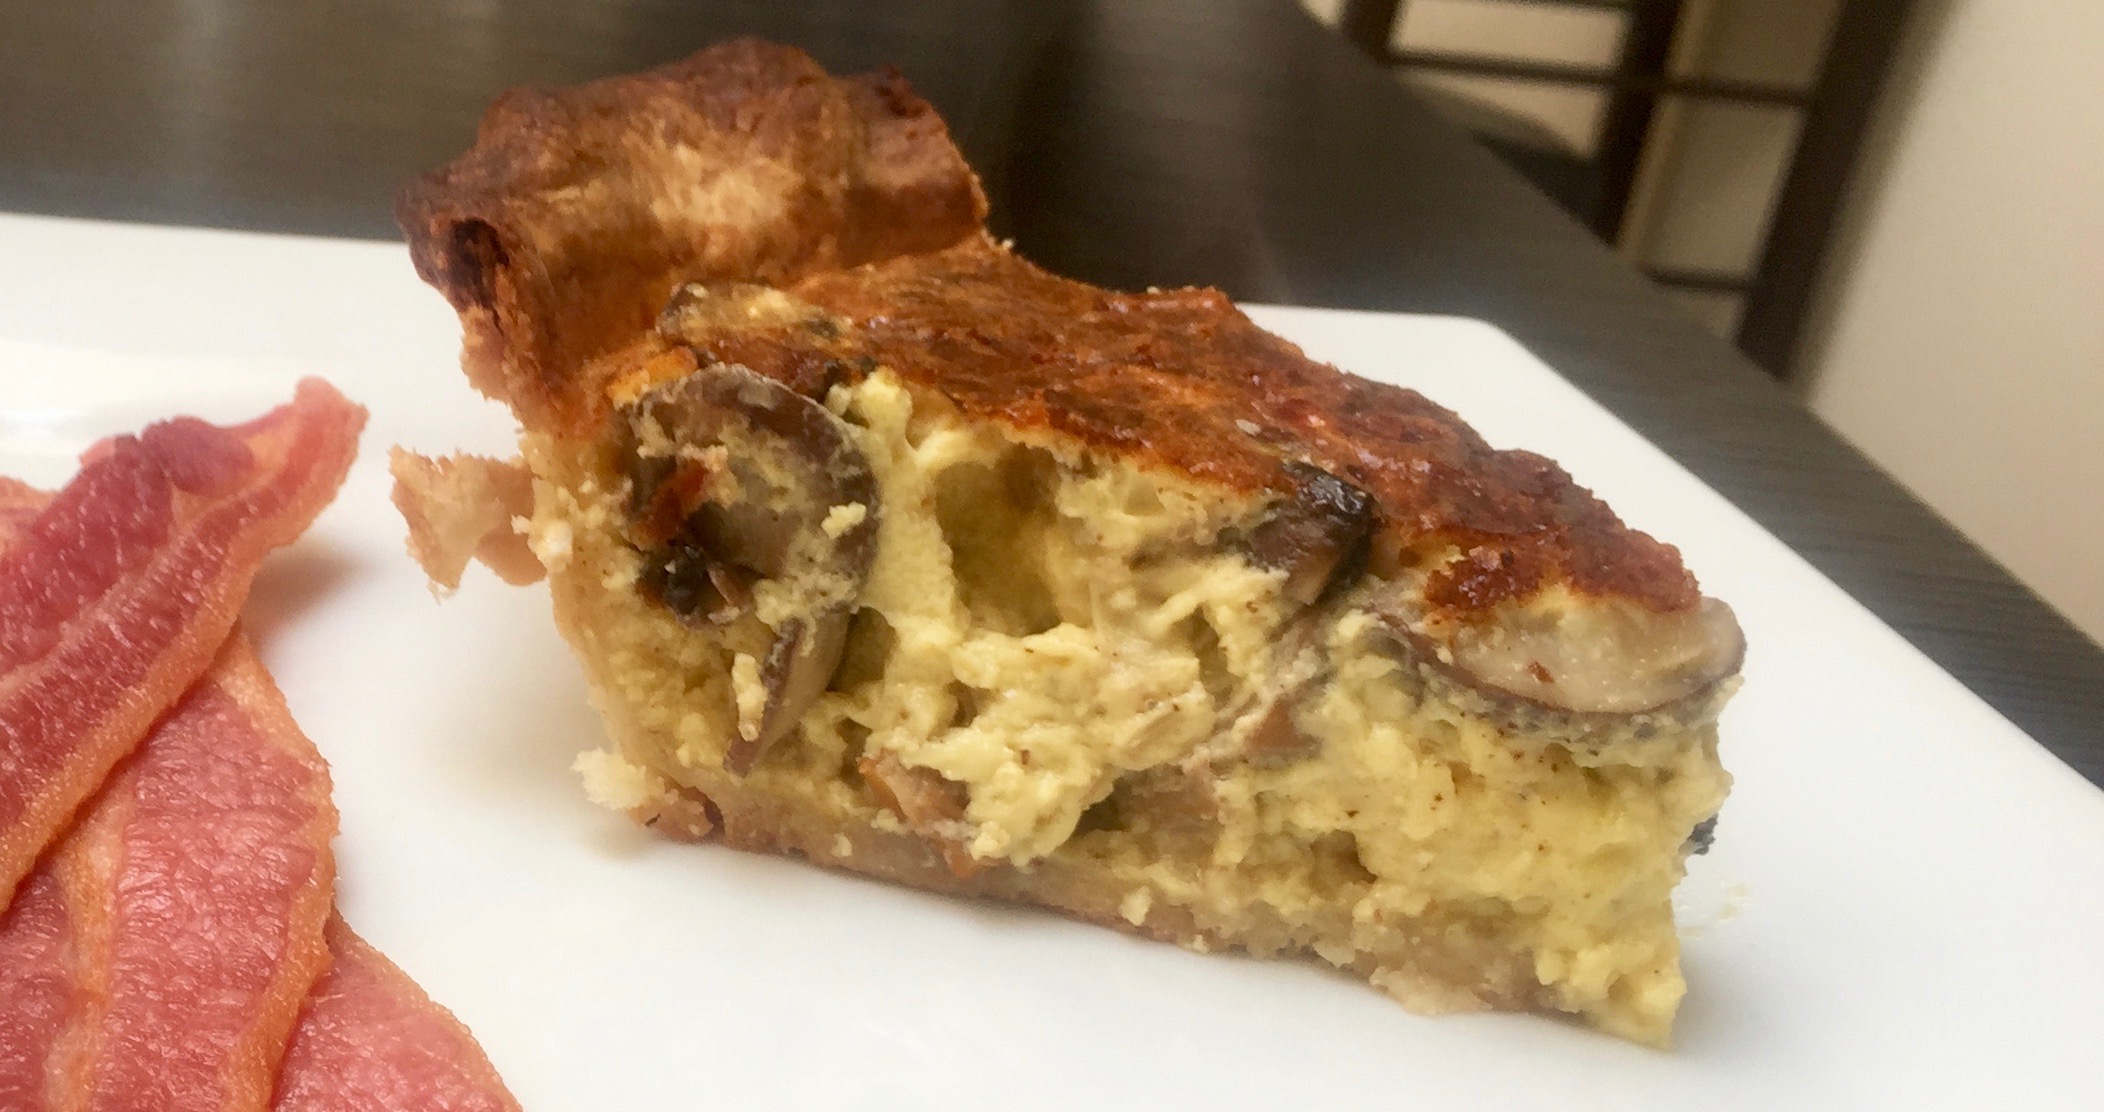 Whit's Cheese and Mushroom Quiche - The Perfect Brunch Food